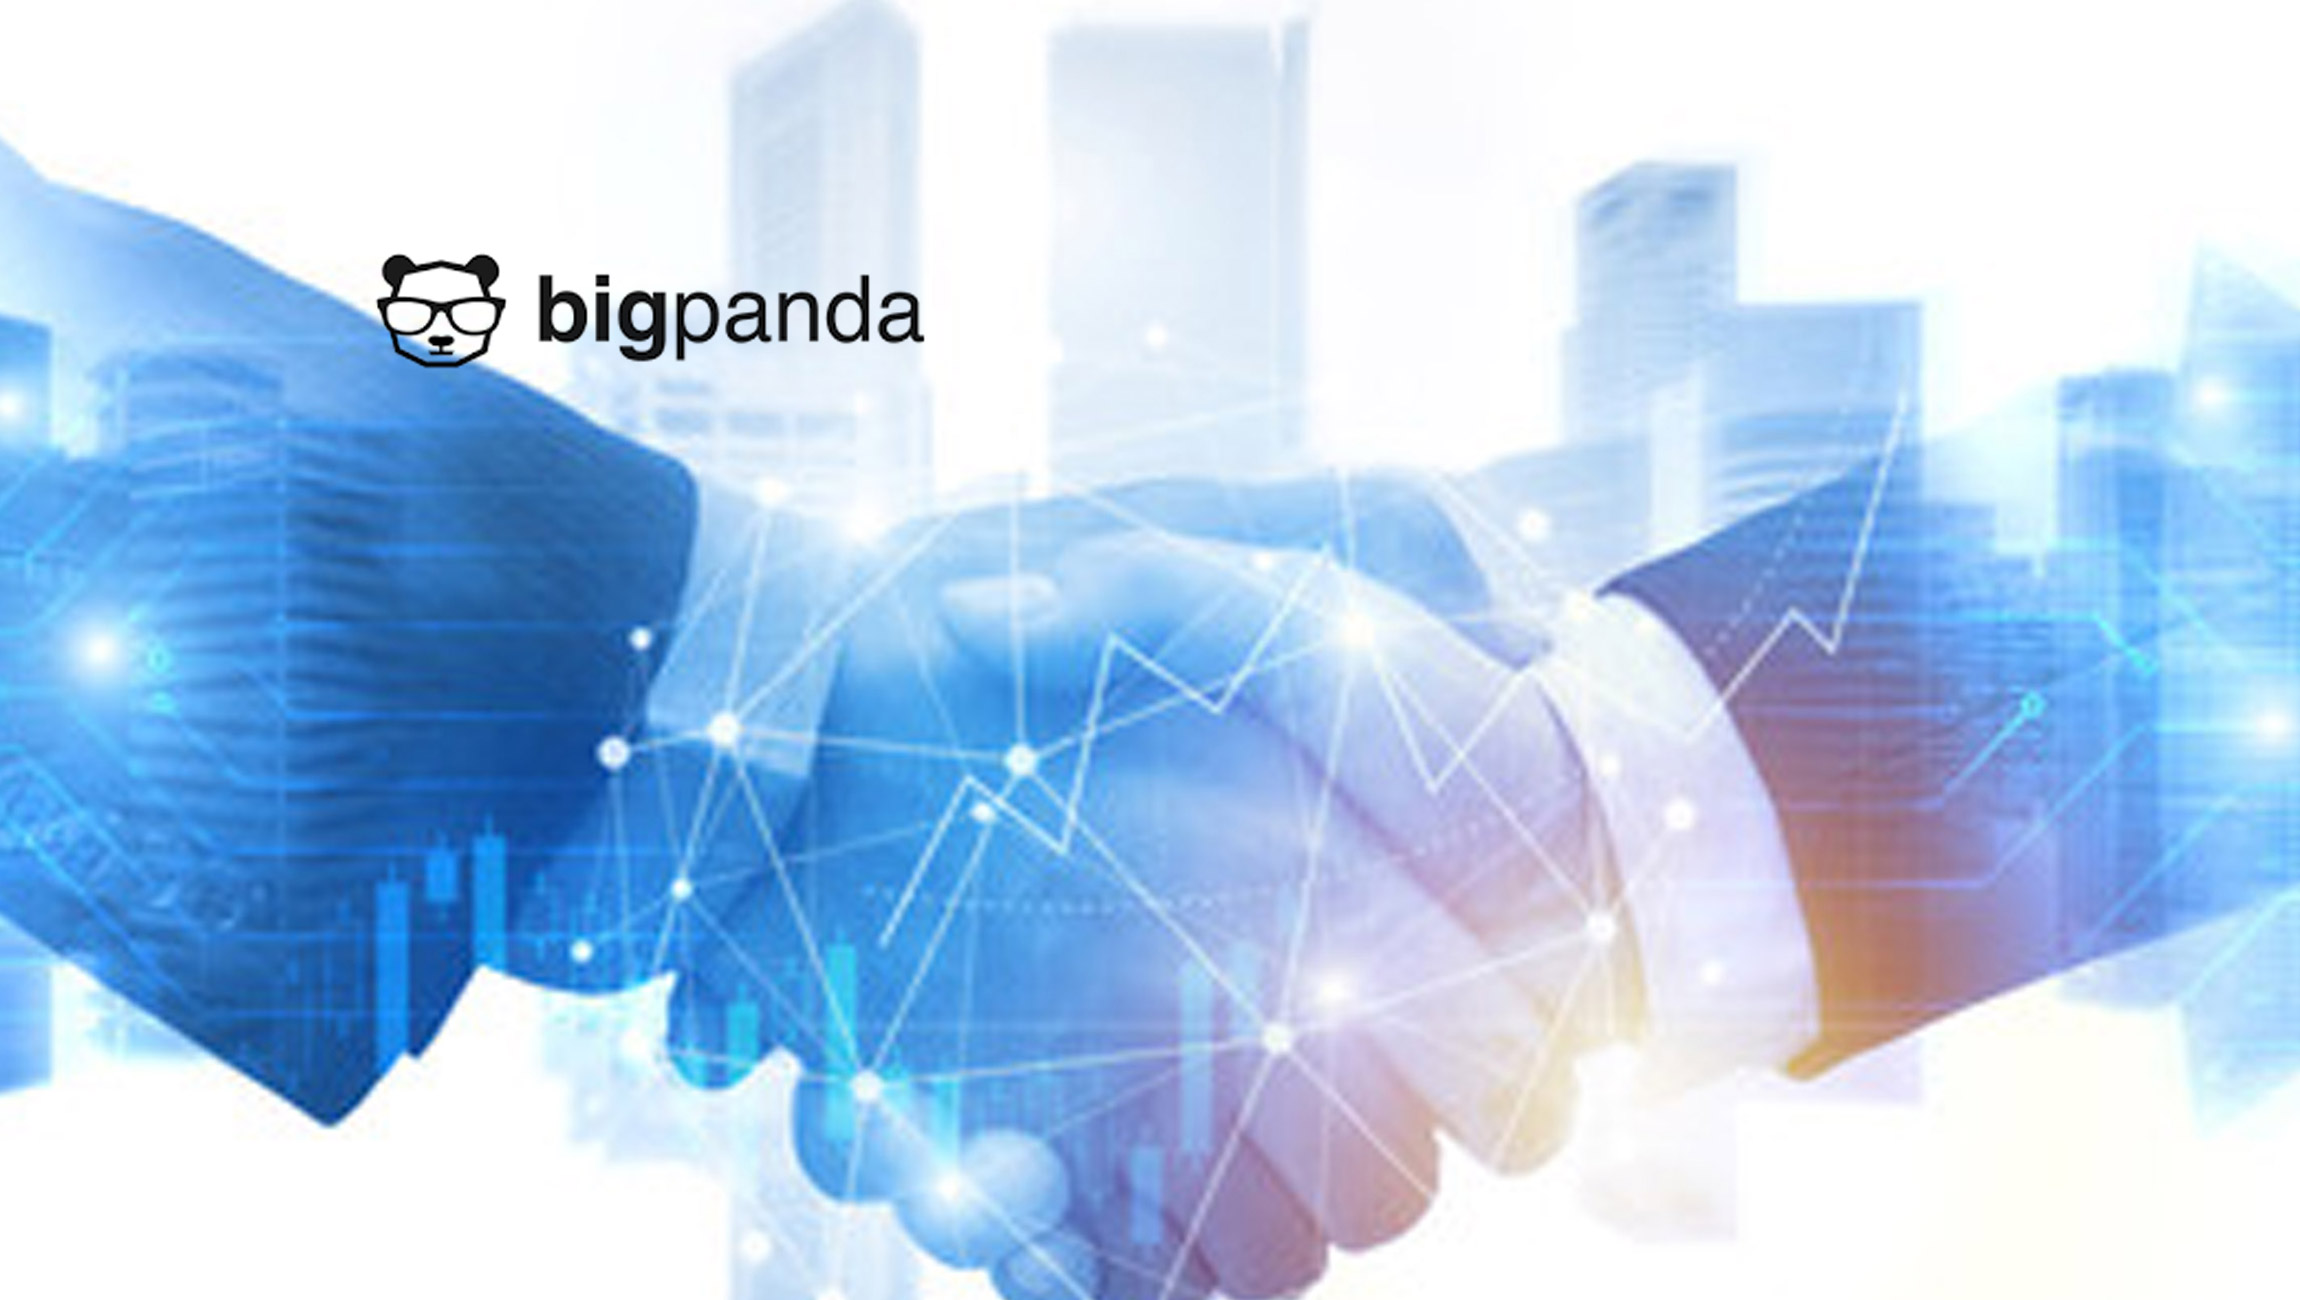 BigPanda Recognizes AHEAD, Sirius Computer Solutions and Blackrock 3 as Stand-out Partners of the Year